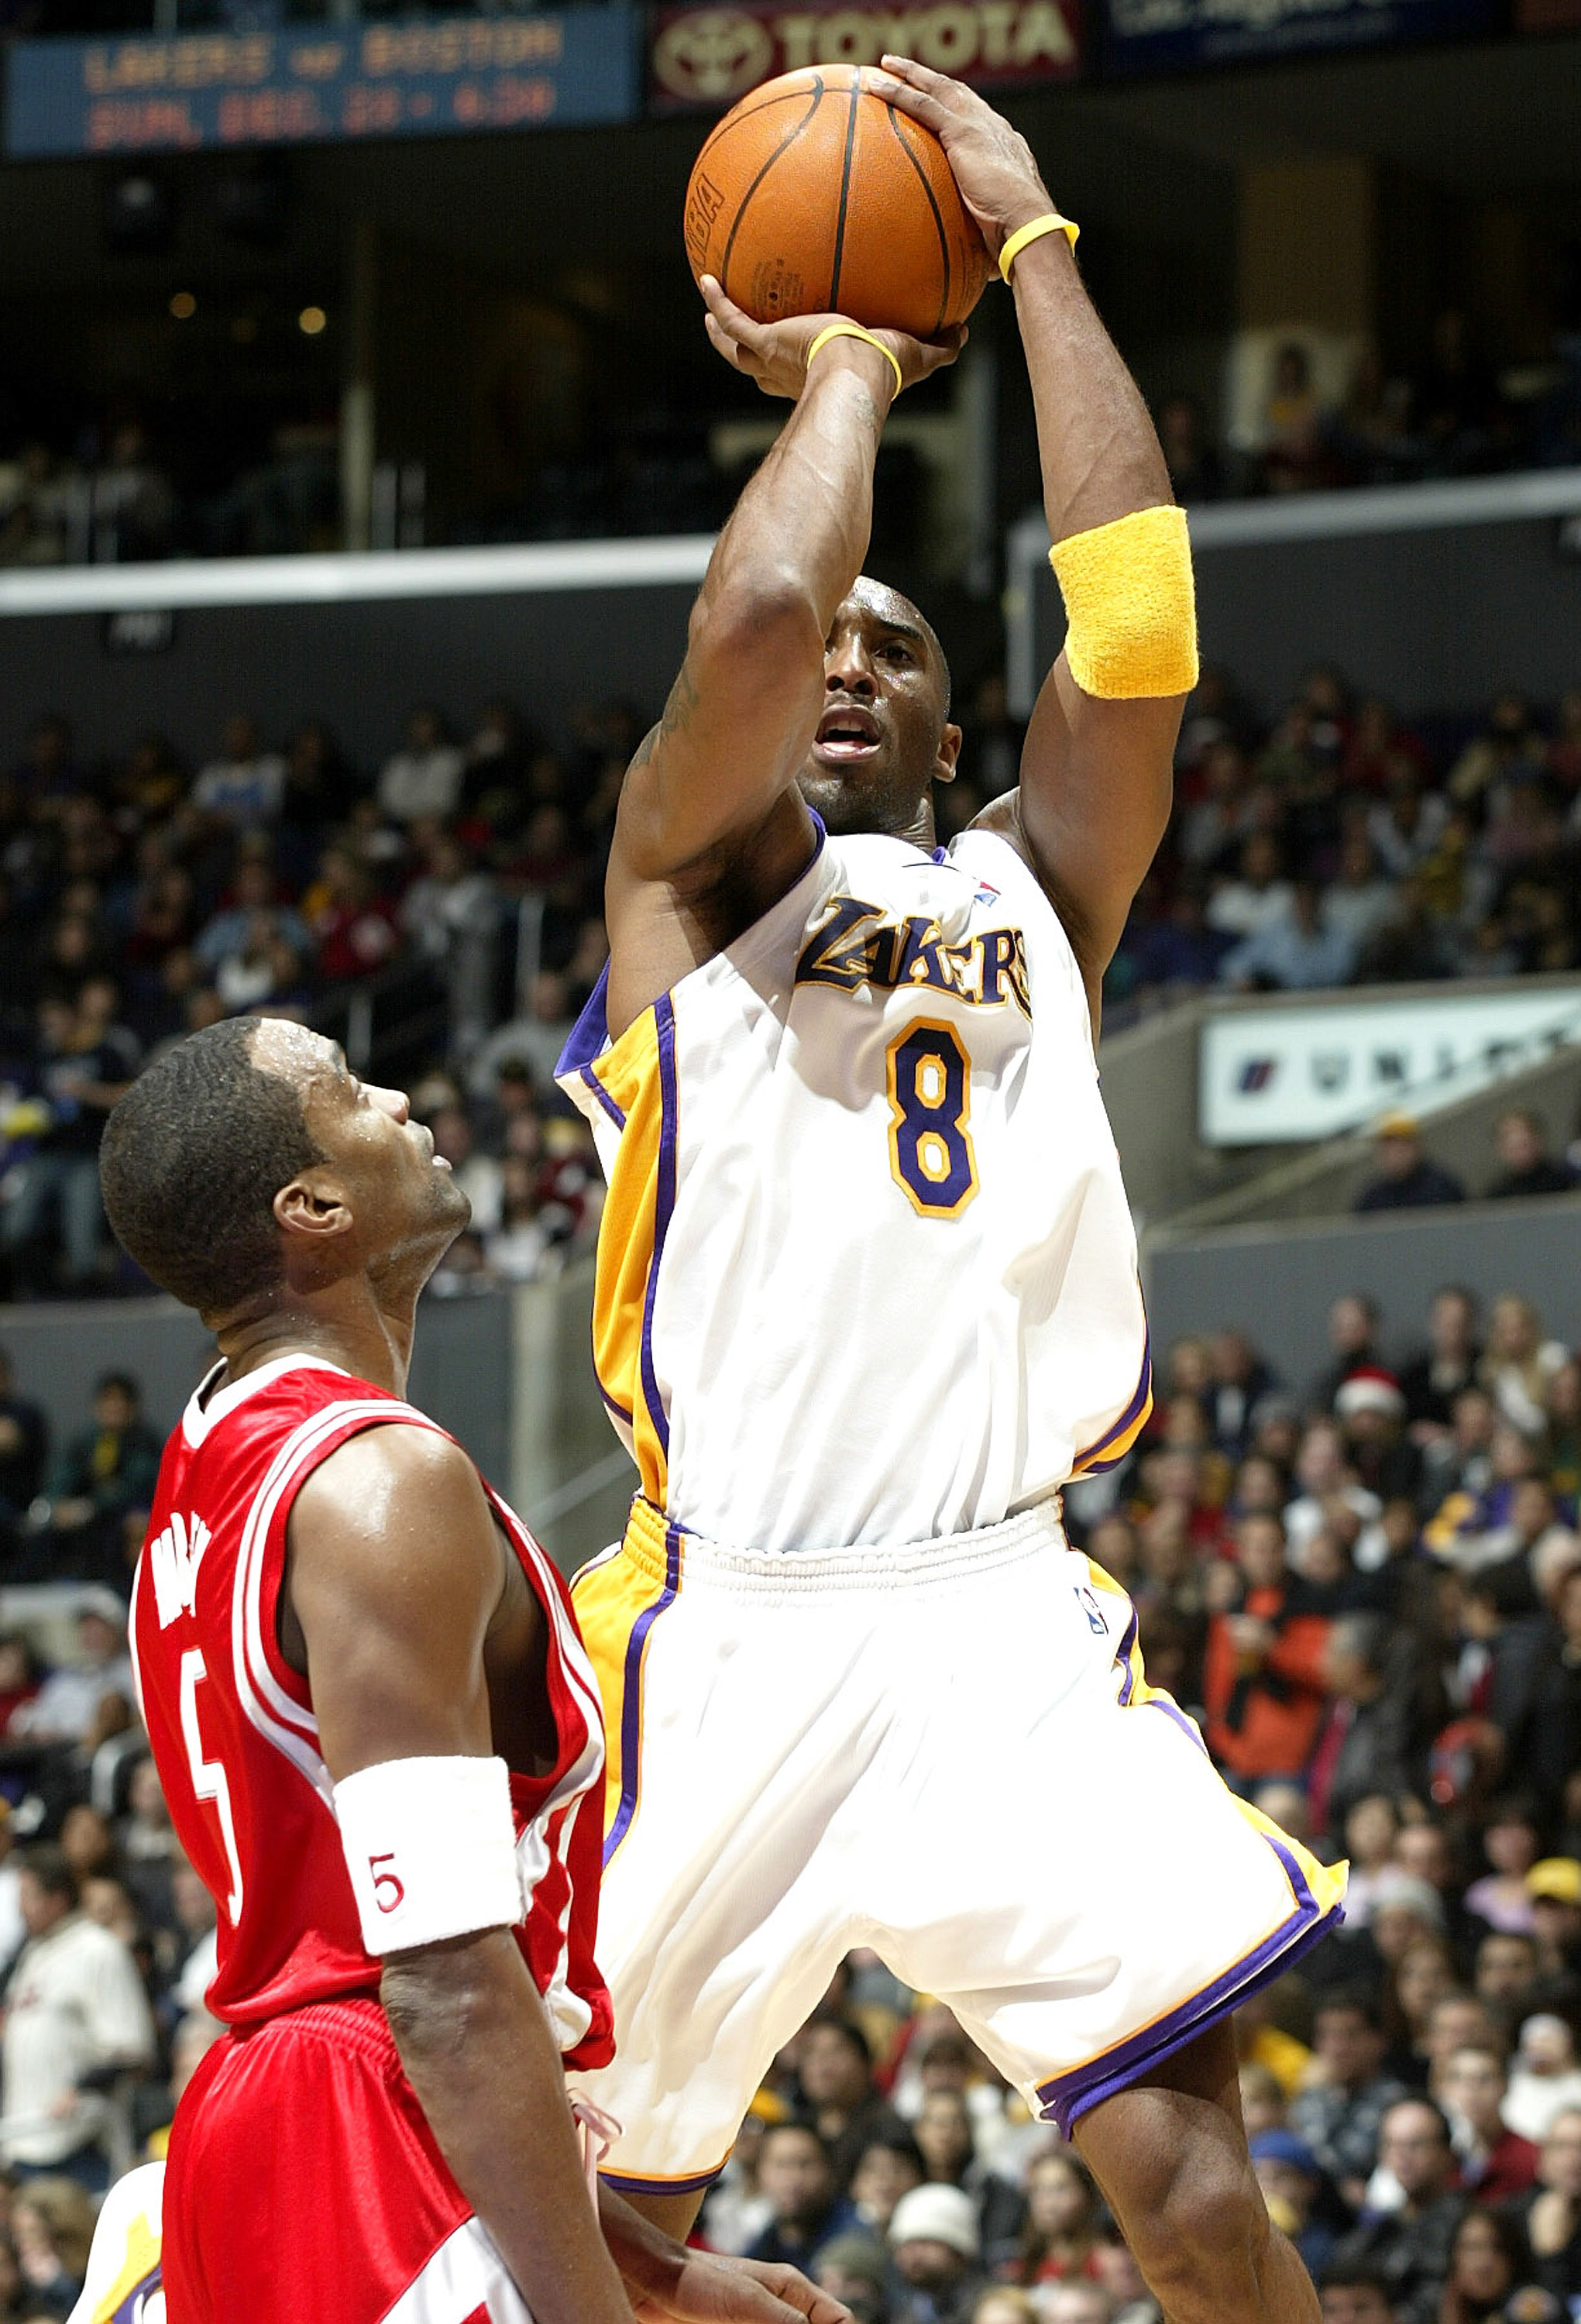 LOS ANGELES - DECEMBER 25:  Kobe Bryant #8 of the Los Angeles Lakers puts a shot up over Cuttino Mobley #5 of the Houston Rockets on December 25, 2003 at the Staples Center in Los Angeles, California.  NOTE TO USER: User expressly acknowledges and agrees